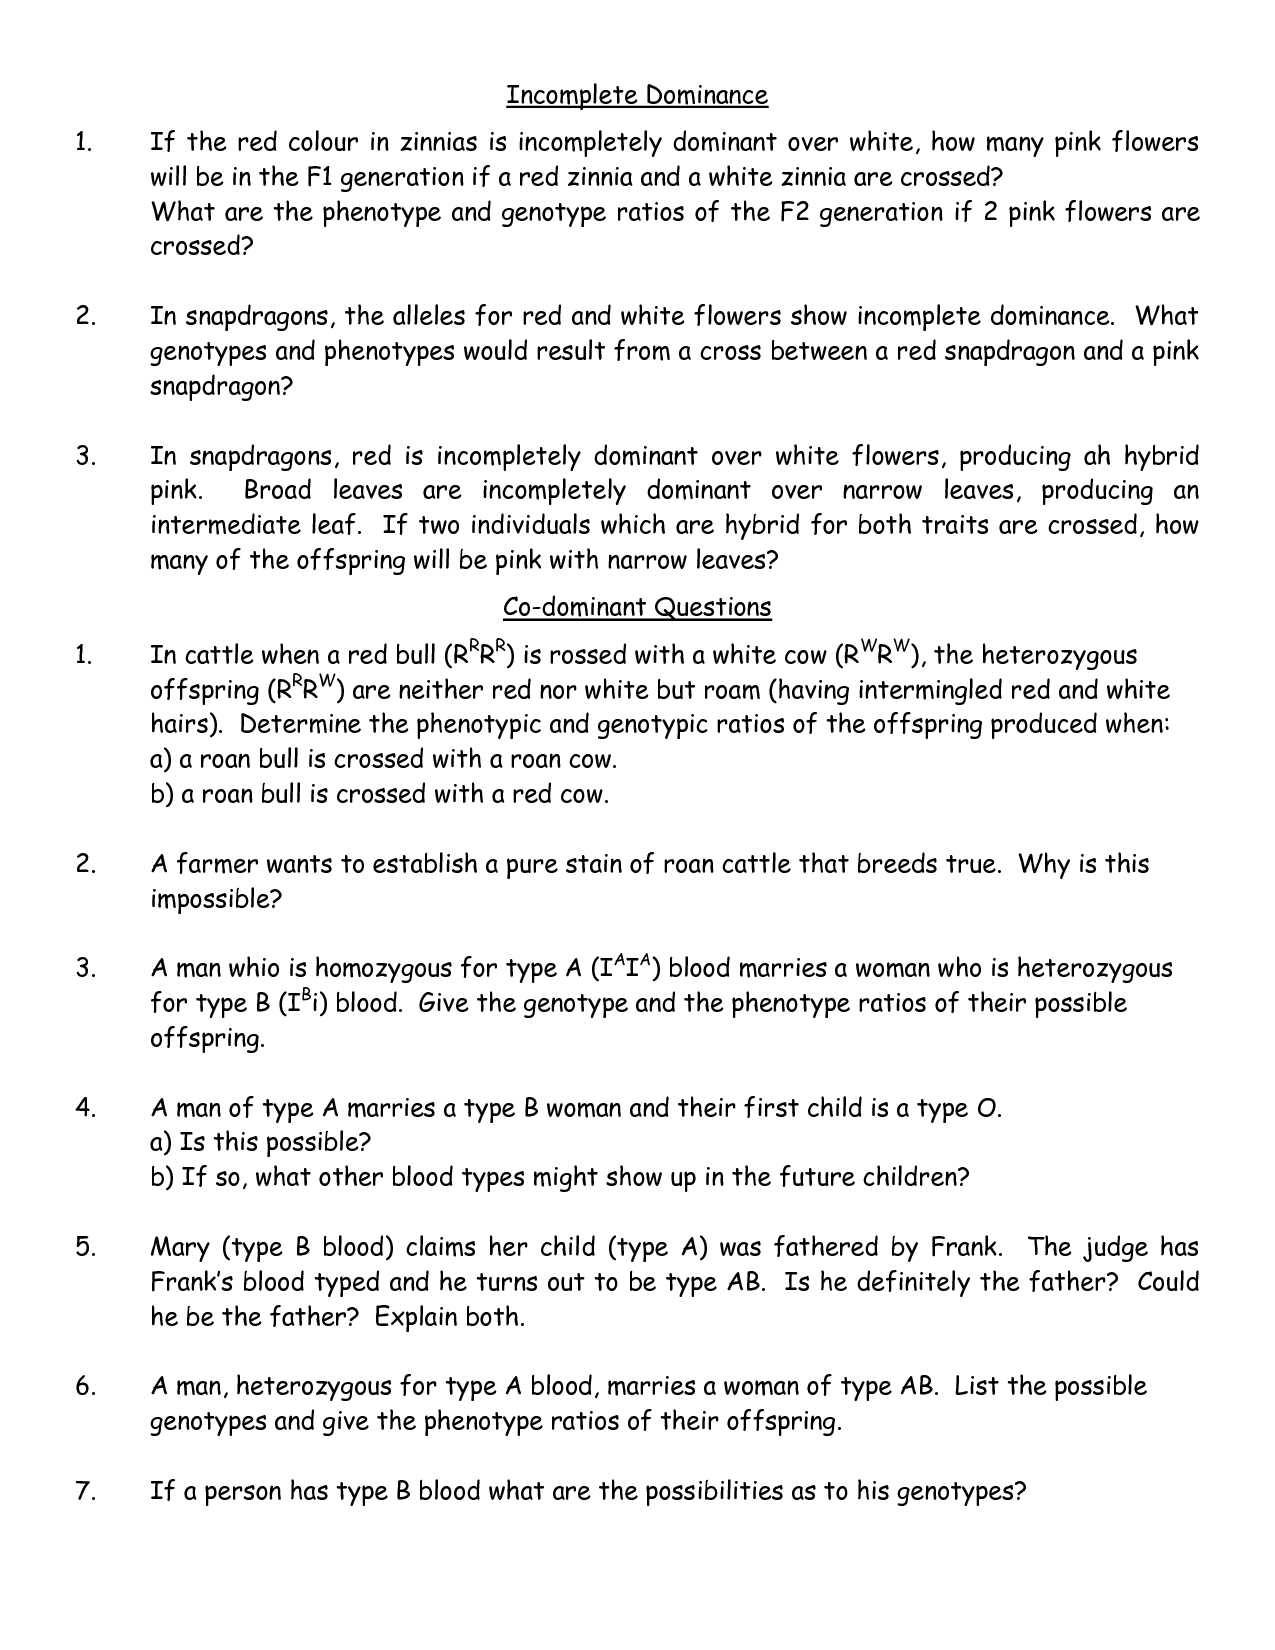 Codominance Worksheet Blood Types as Well as 41 Codominance Worksheet Blood Types Answers 16 Best